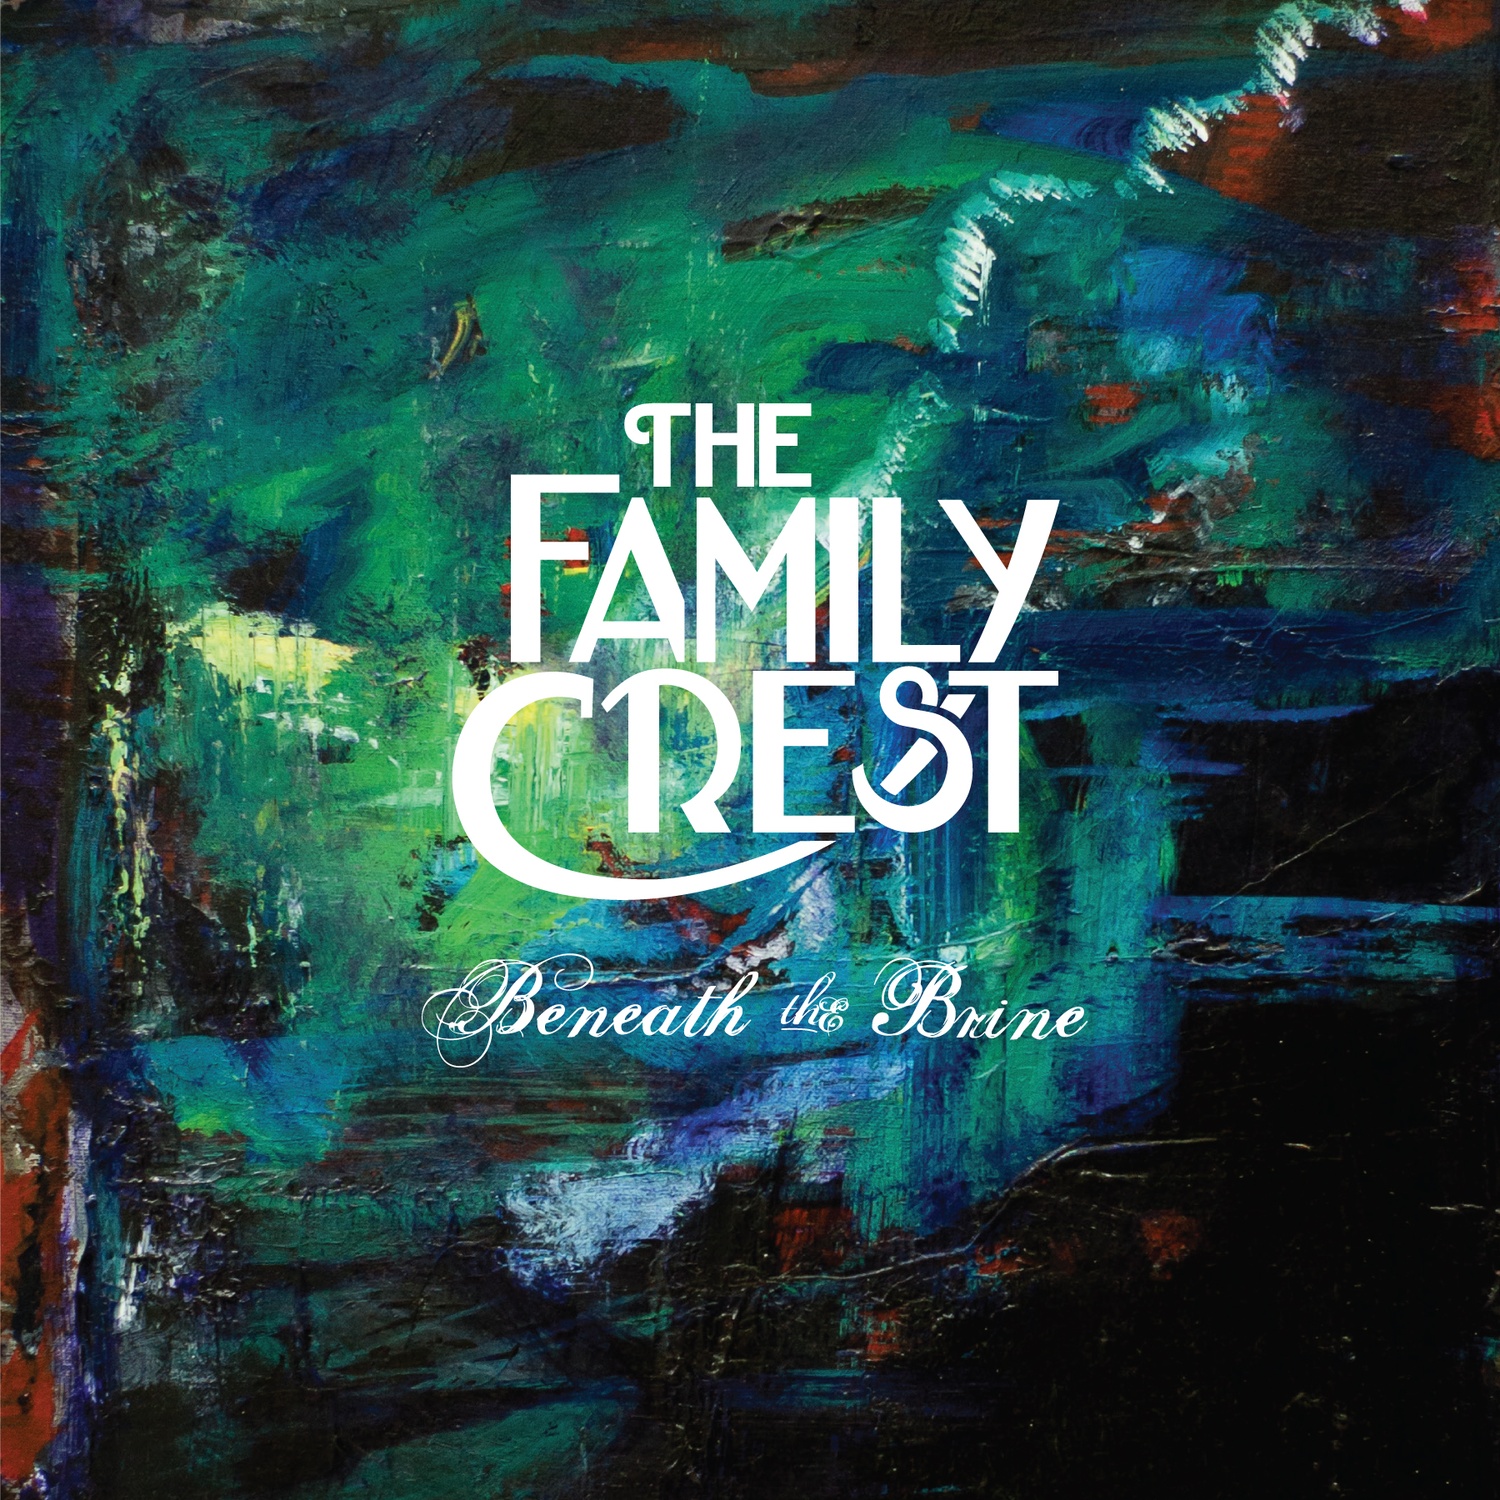 The Family Crest's album, Beneath The Brine, is out now.